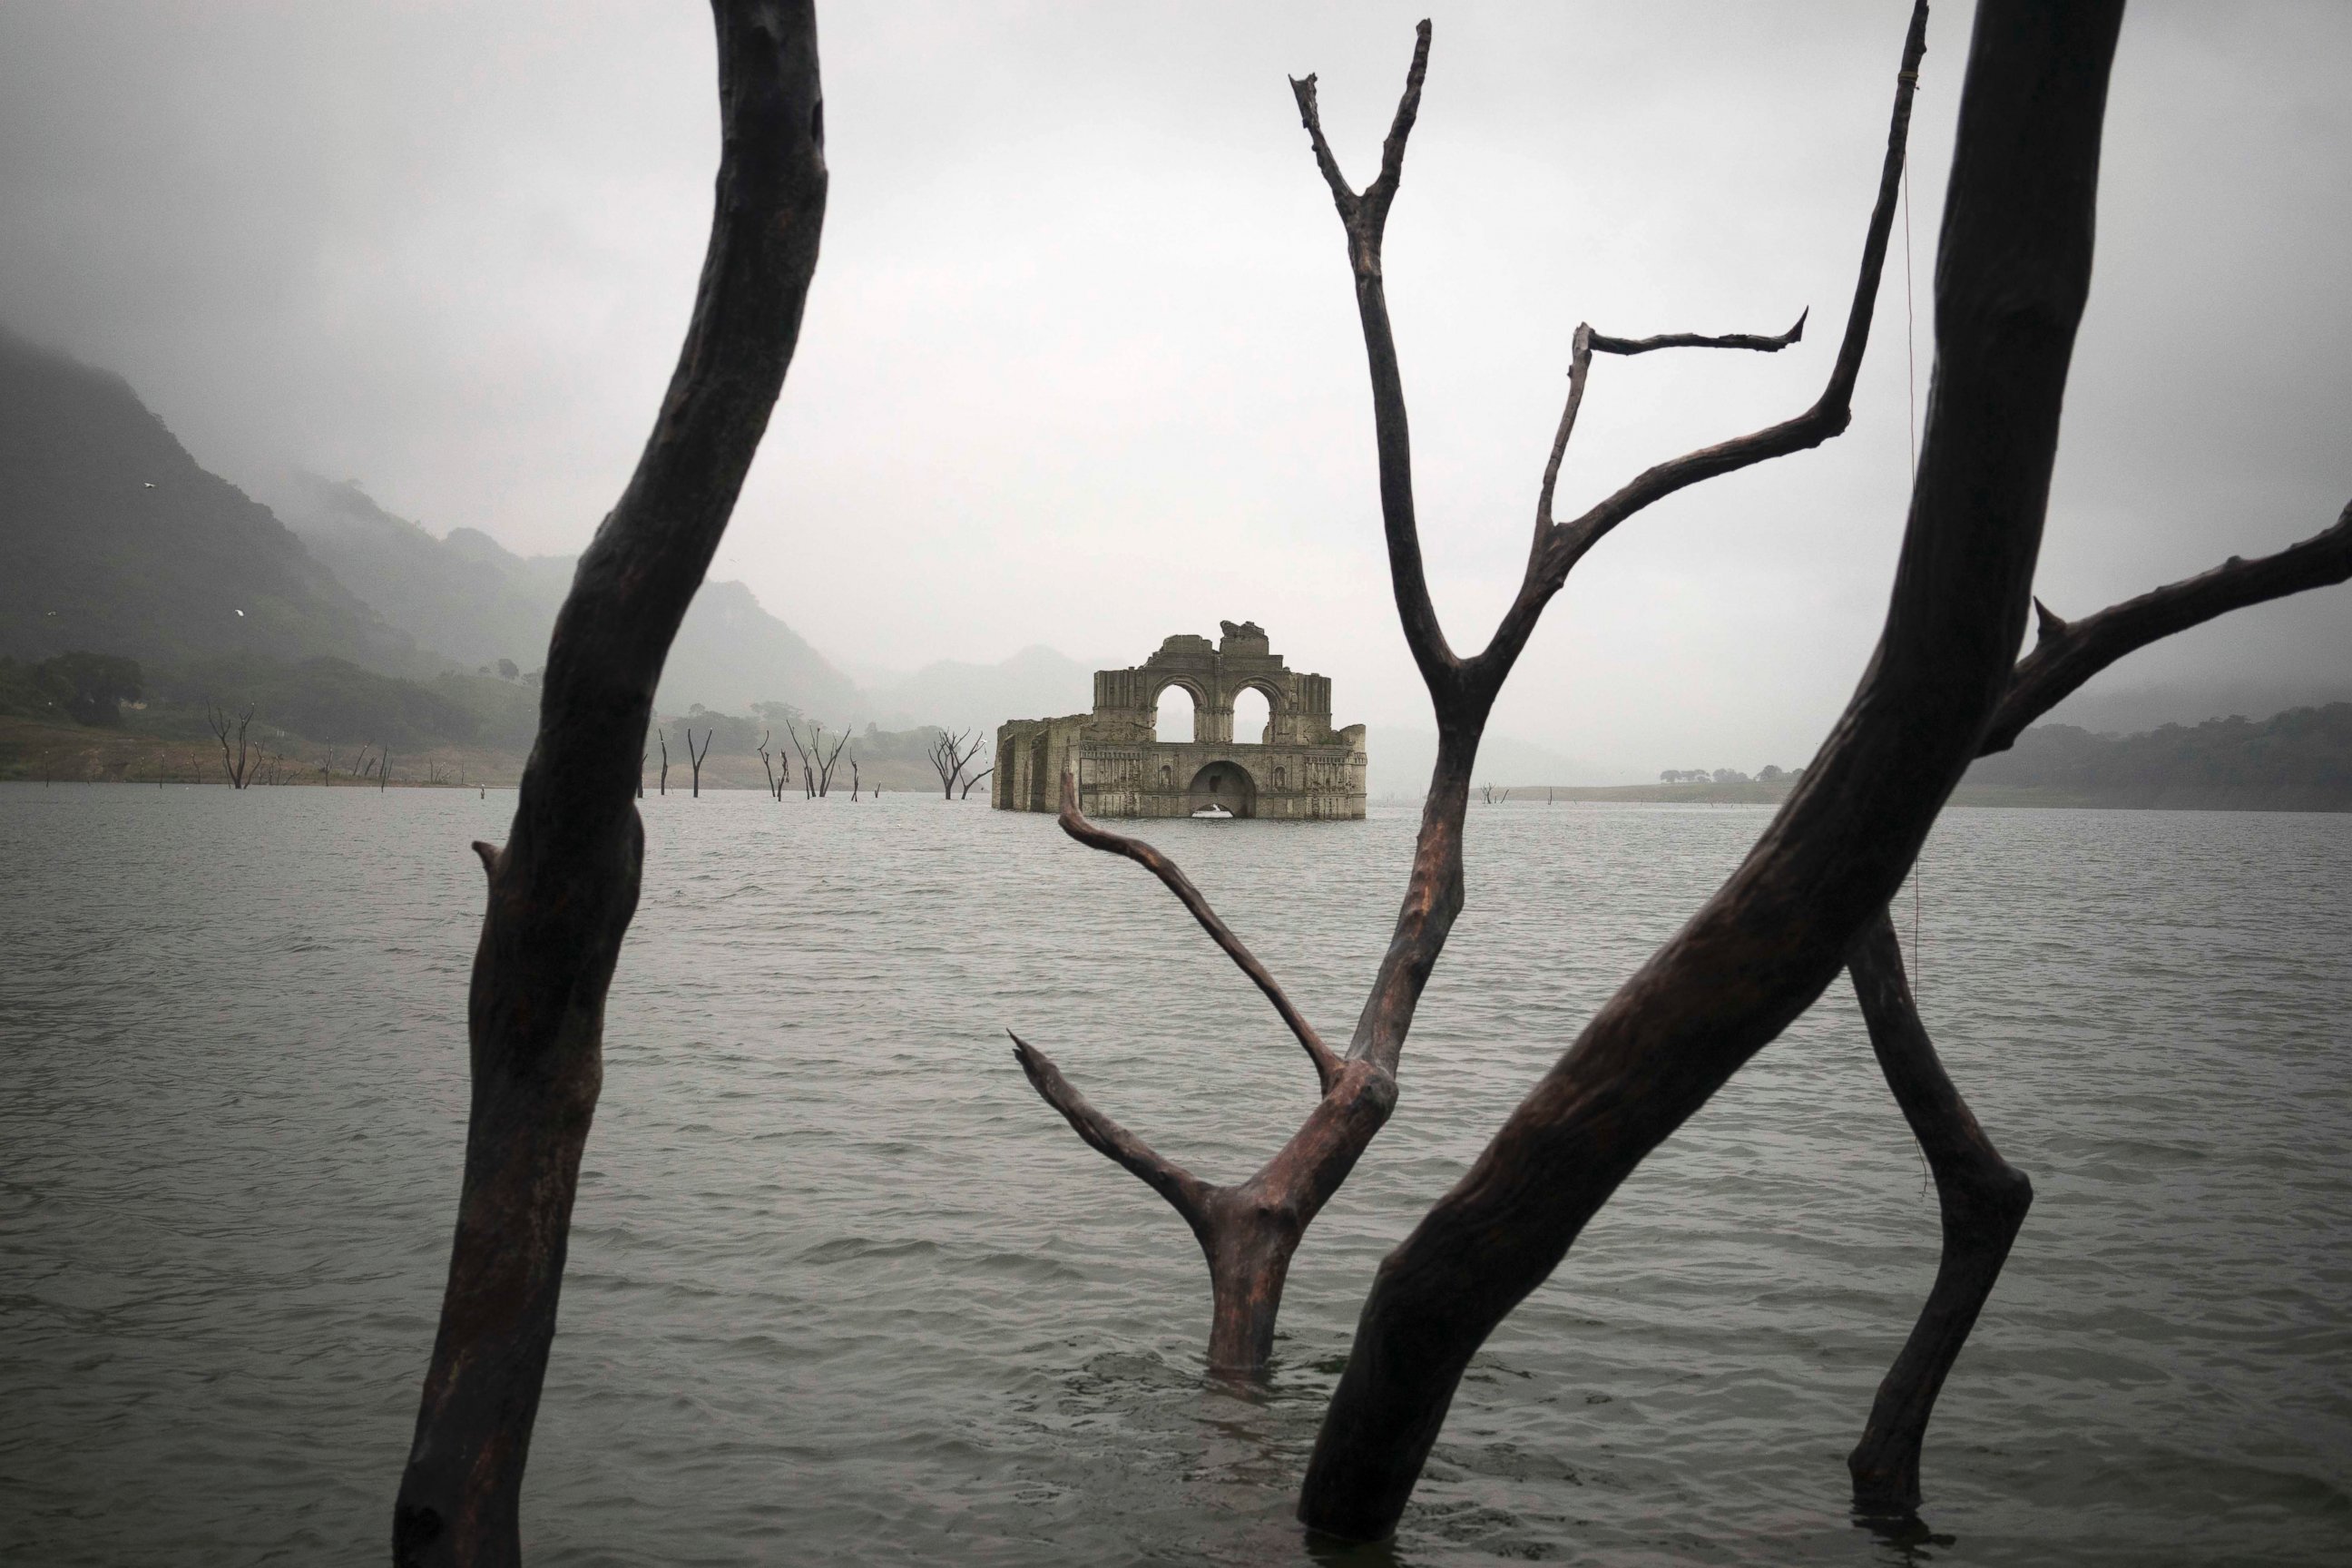 PHOTO: The remains of a mid-16th century church known as the Temple of Santiago, as well as the Temple of Quechula, is visible from the surface of the Grijalva River in Chiapas state, Mexico, Oct. 16, 2015. 